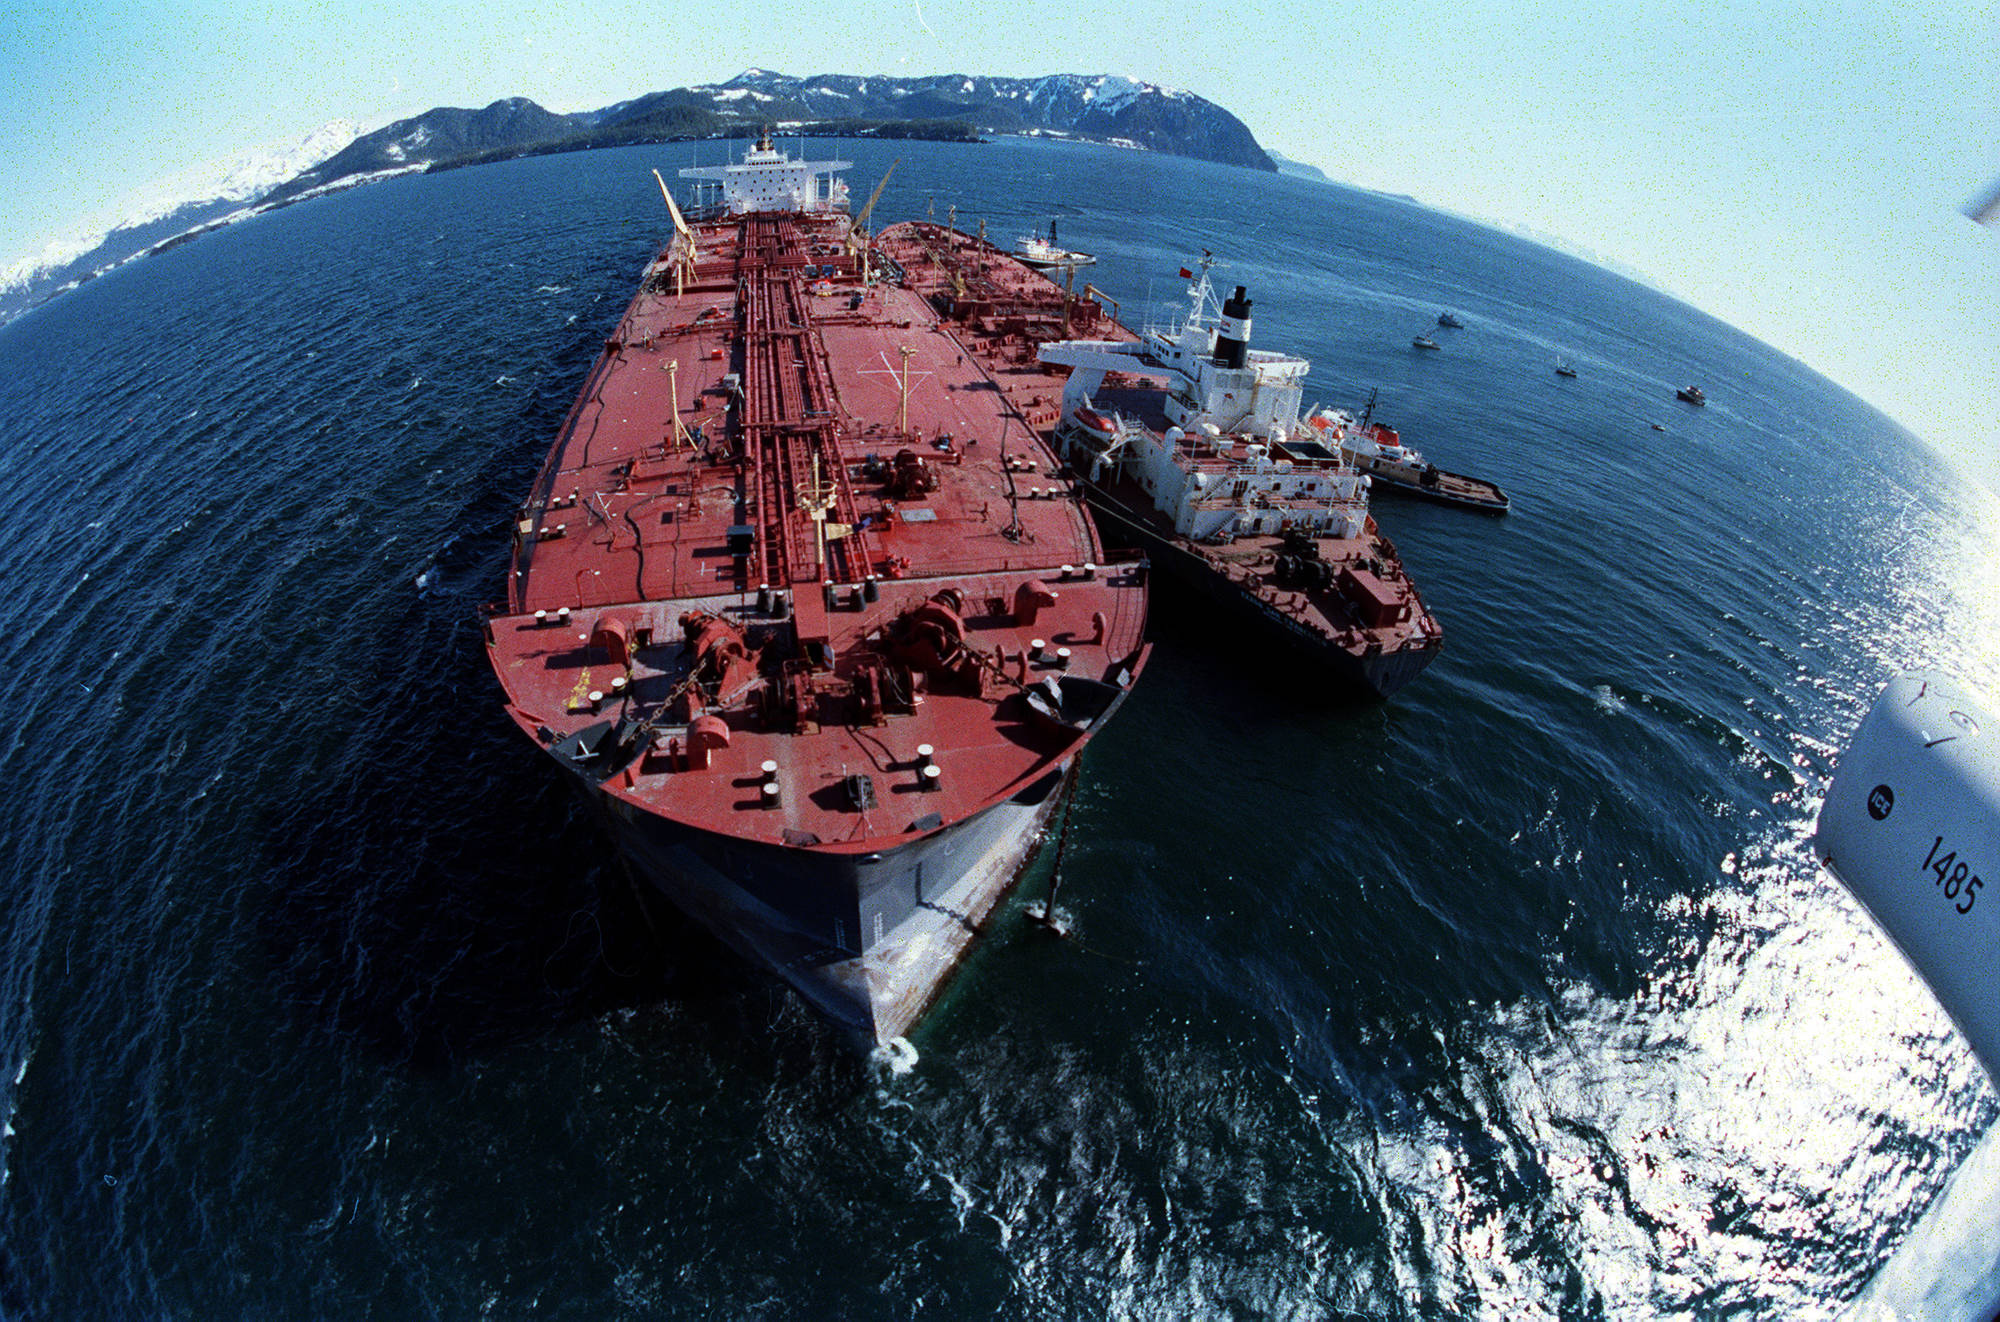 In this April 4, 1989 photo, the grounded tanker Exxon Valdez, left, unloads oil onto a smaller tanker, San Francisco, as efforts to refloat the ship continue on Prince William Sound. The Exxon Valdez tanker struck Alaska’s Bligh Reef on March 24, 1989, while bound for California. It spilled about 11 million gallons of crude oil, which storms and currents smeared across about 1,300 miles of shoreline. (Rob Stapleton | Associated Press File)